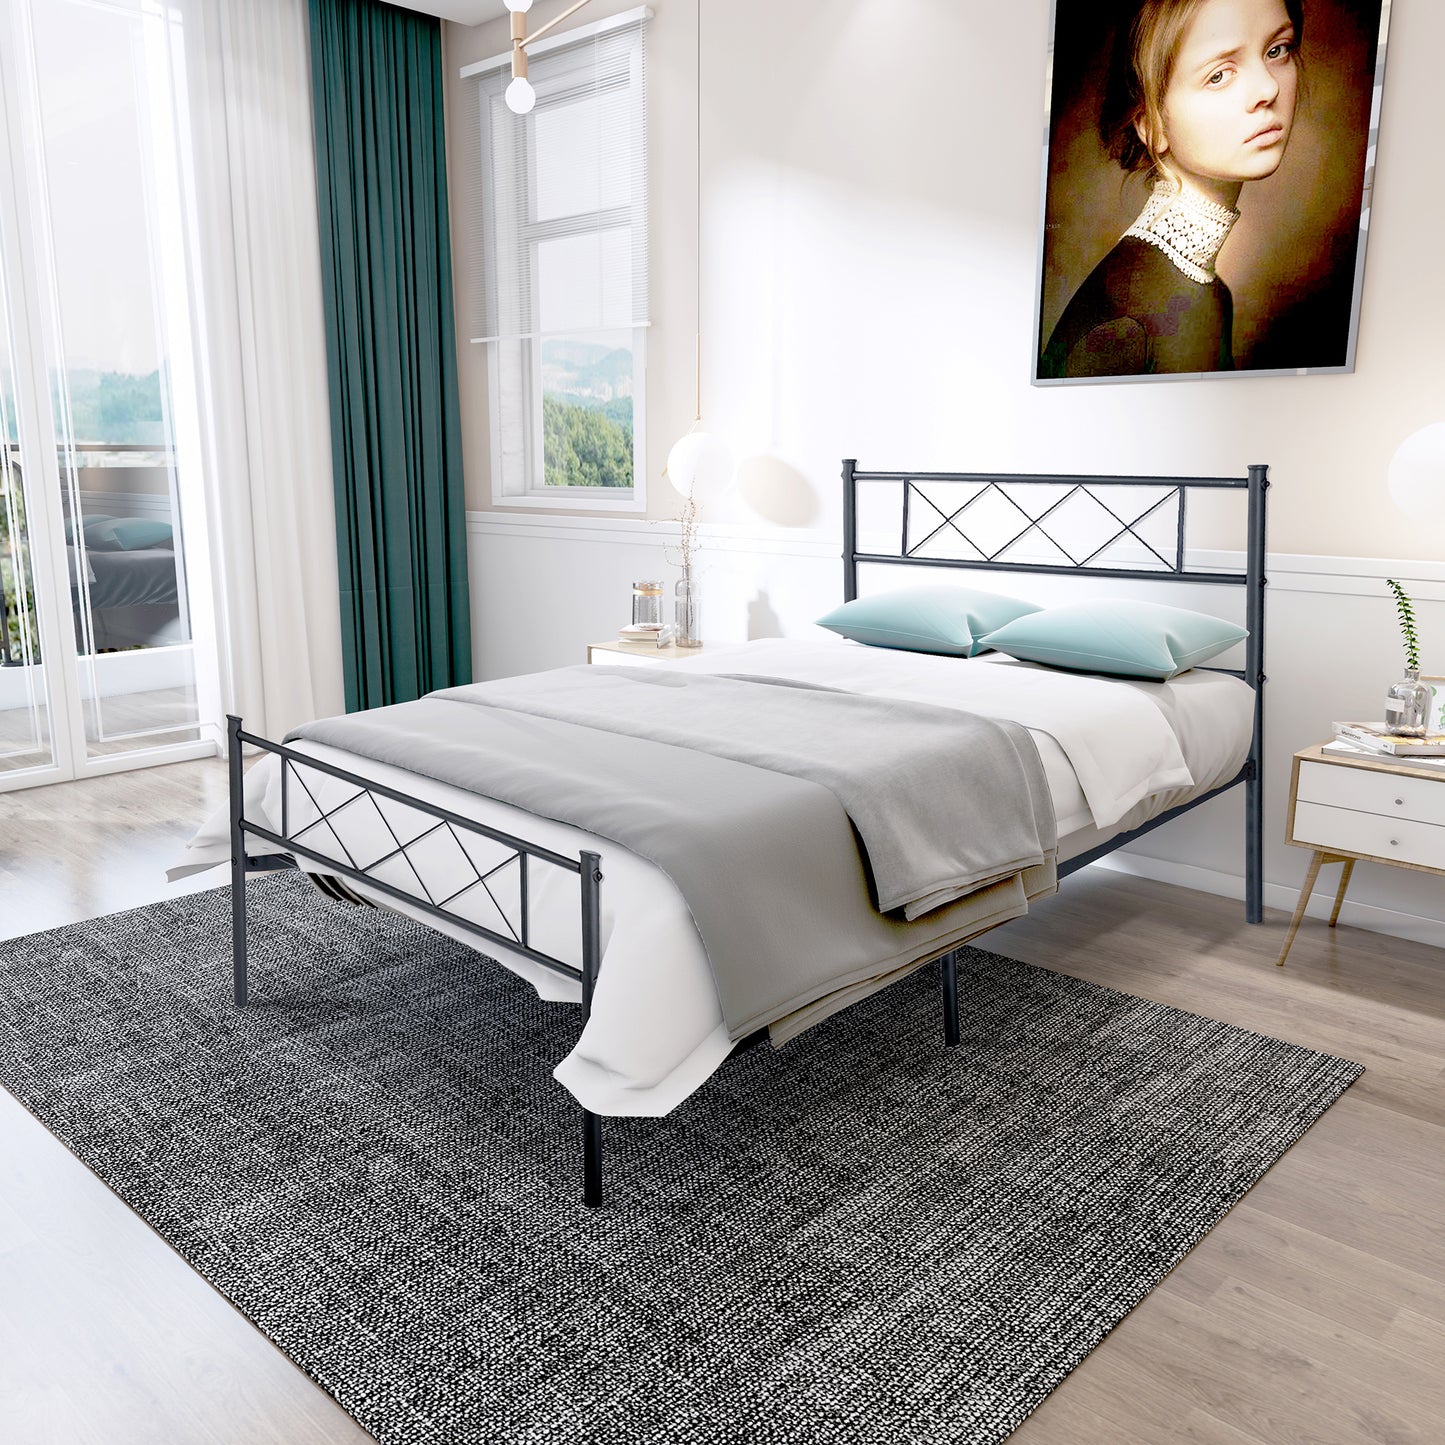 twin size single metal bed frame